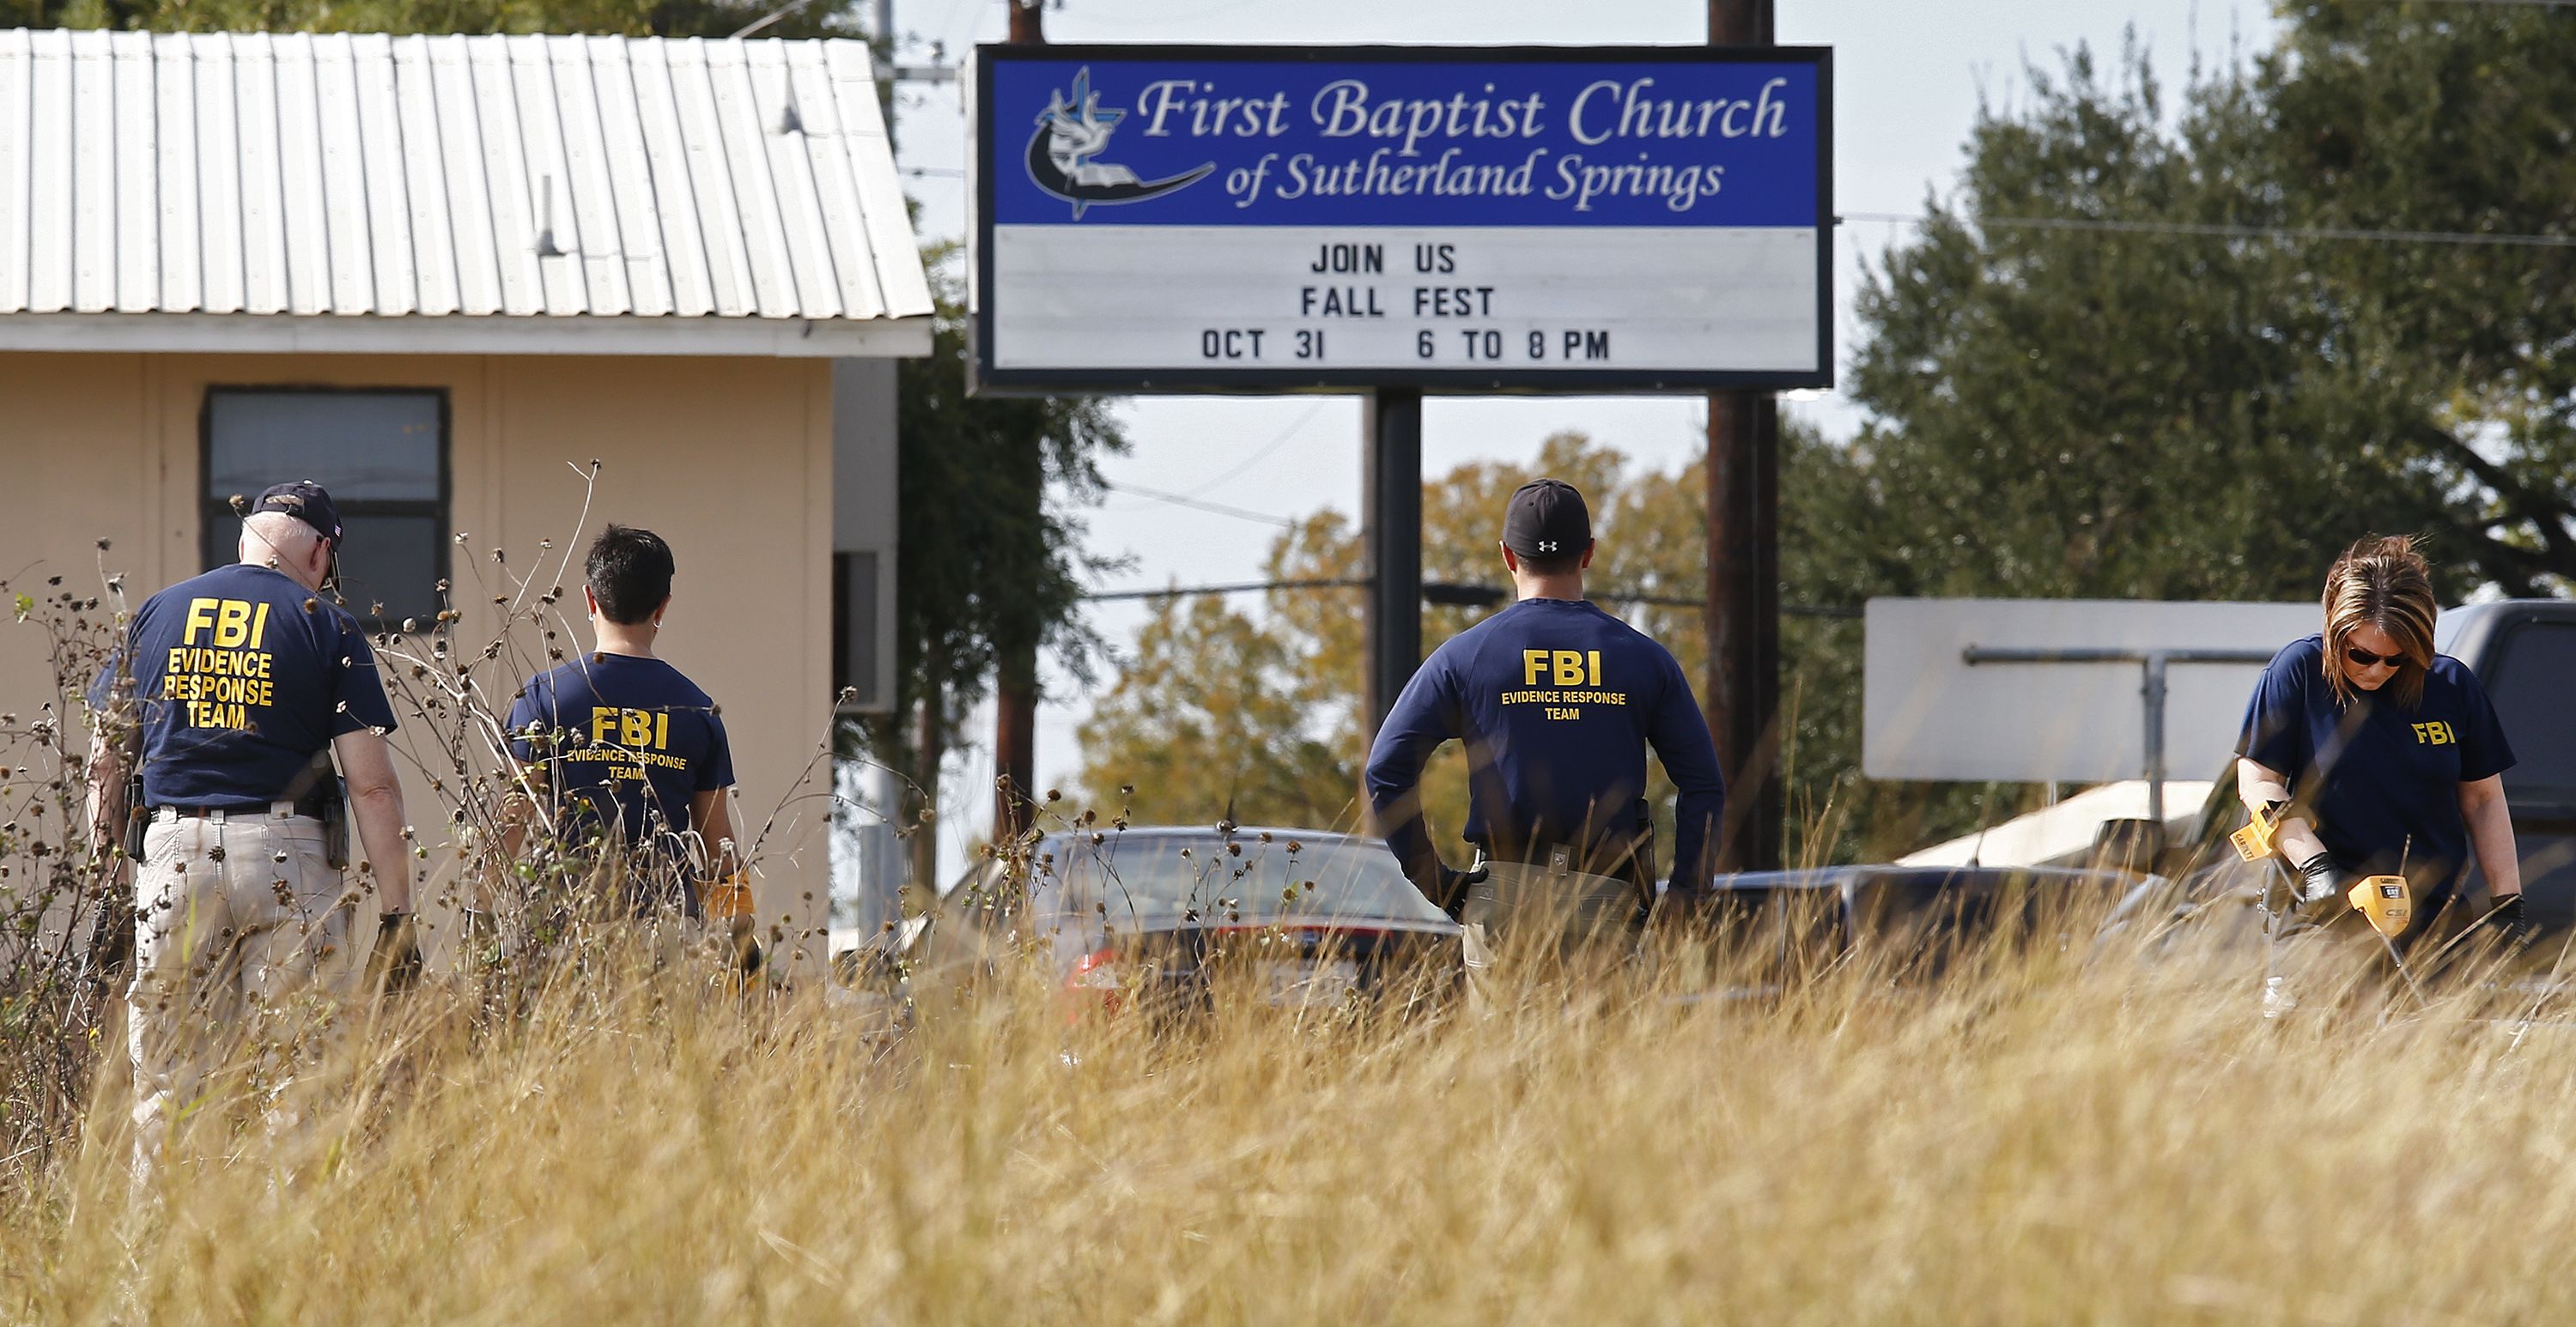 'Too Stark Of A Reminder.' Texas Church Where 26 Were Killed Will Be Demolished, Pastor Says
